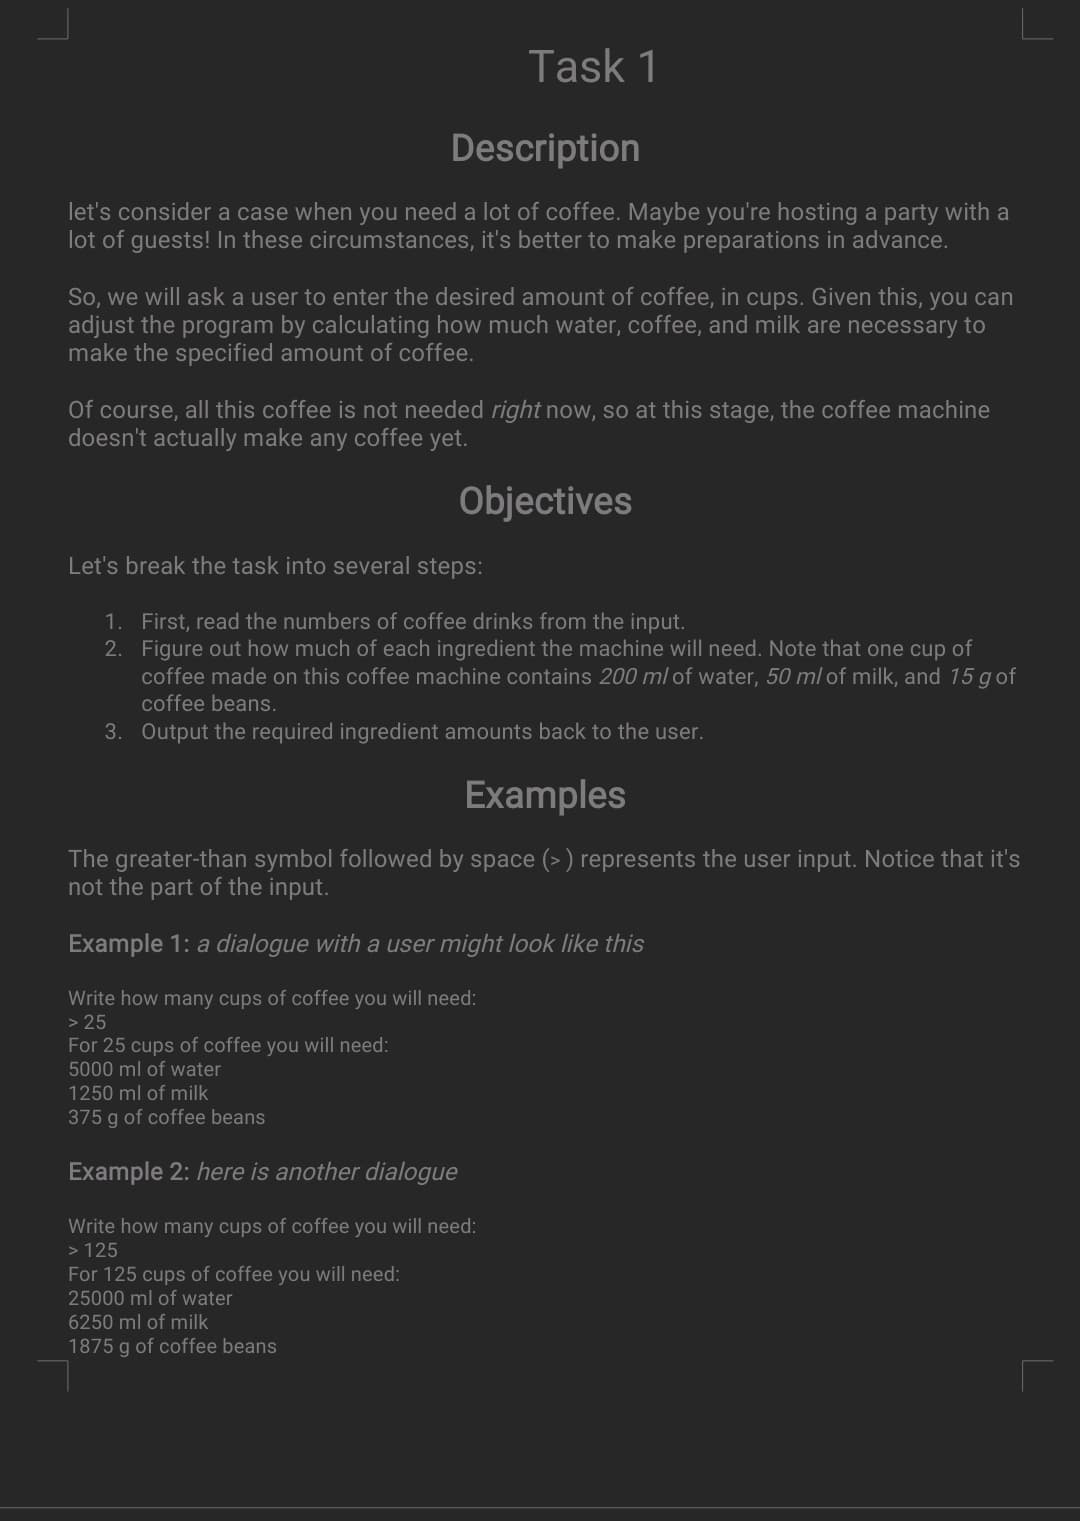 Task 1
Description
let's consider a case when you need a lot of coffee. Maybe you're hosting a party with a
lot of guests! In these circumstances, it's better to make preparations in advance.
So, we will ask a user to enter the desired amount of coffee, in cups. Given this, you can
adjust the program by calculating how much water, coffee, and milk are necessary to
make the specified amount of coffee.
Of course, all this coffee is not needed right now, so at this stage, the coffee machine
doesn't actually make any coffee yet.
Objectives
Let's break the task into several steps:
1. First, read the numbers of coffee drinks from the input.
2. Figure out how much of each ingredient the machine will need. Note that one cup of
coffee made on this coffee machine contains 200 ml of water, 50 ml of milk, and 15 gof
coffee beans.
3. Output the required ingredient amounts back to the user.
Examples
The greater-than symbol followed by space (> ) represents the user input. Notice that it's
not the part of the input.
Example 1: a dialogue with a user might look like this
Write how many cups of coffee you will need:
> 25
For 25 cups of coffee you will need:
5000 ml of water
1250 ml of milk
375 g of coffee beans
Example 2: here is another dialogue
Write how many cups of coffee you will need:
> 125
For 125 cups of coffee you will need:
25000 ml of water
6250 ml of milk
1875 g of coffee beans
